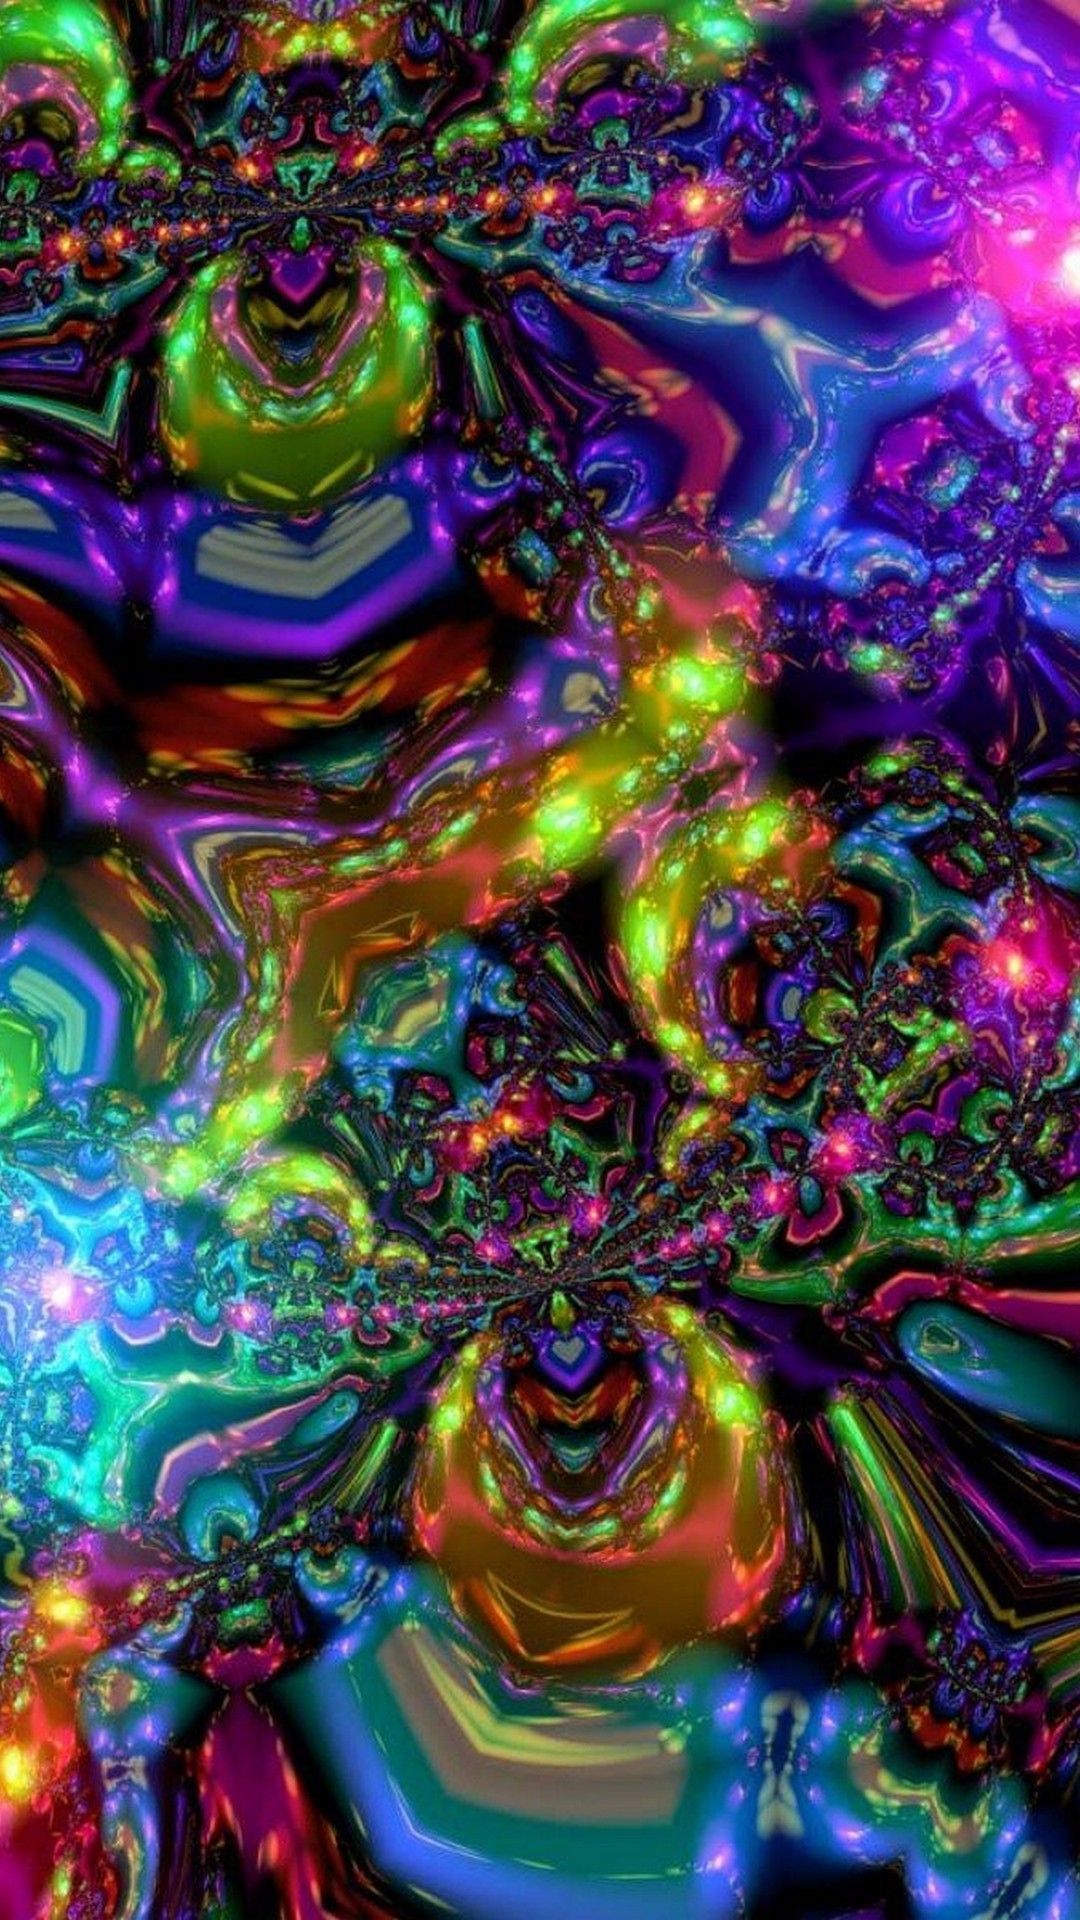 10 Top trippy aesthetic wallpaper desktop You Can Use It free ...